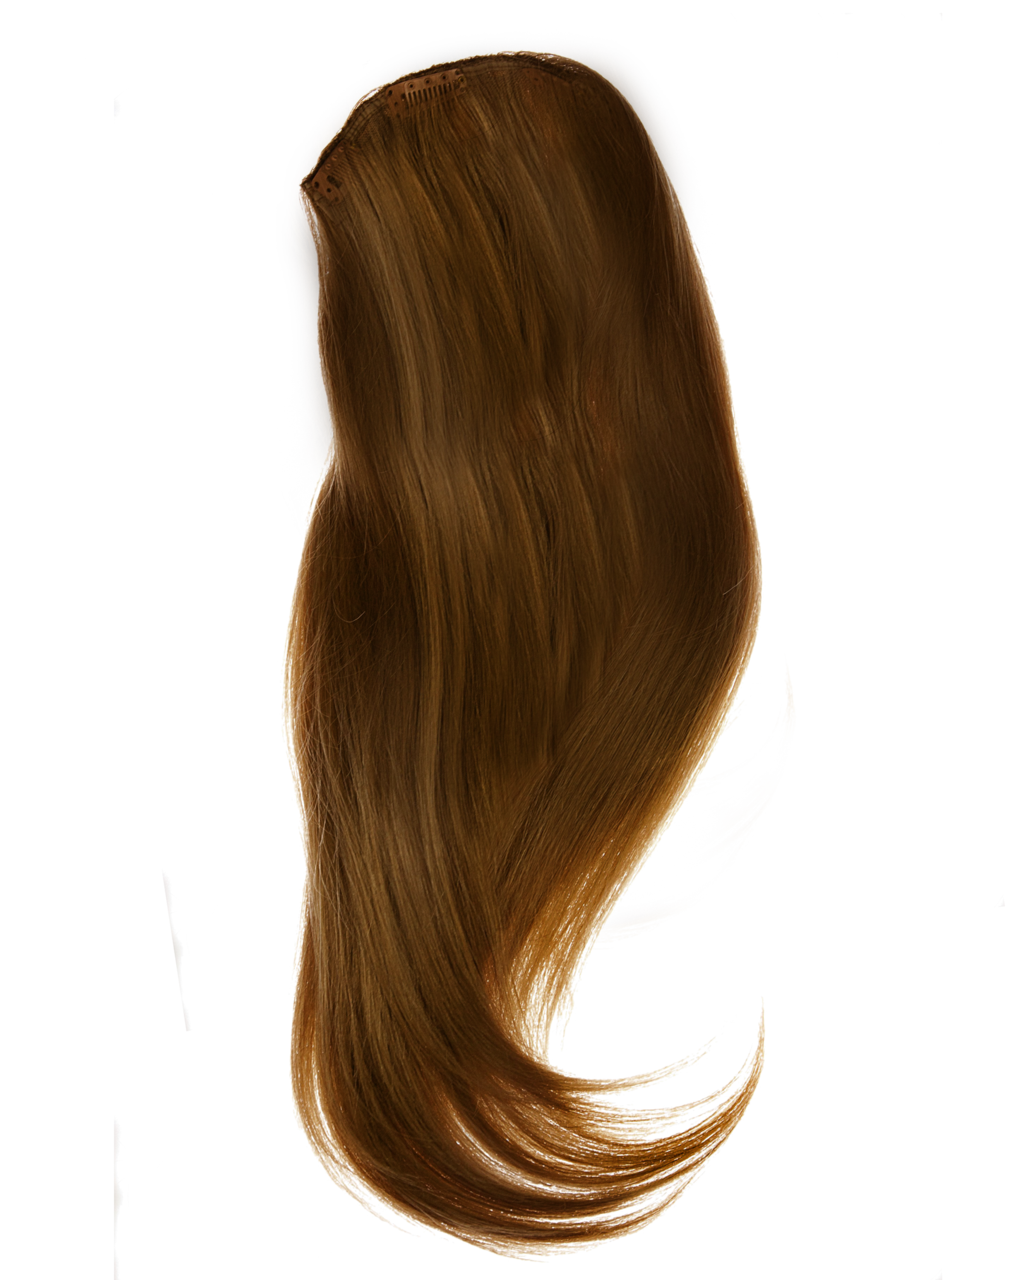 New Her png  Editing background, Hair png, Photoshop backgrounds